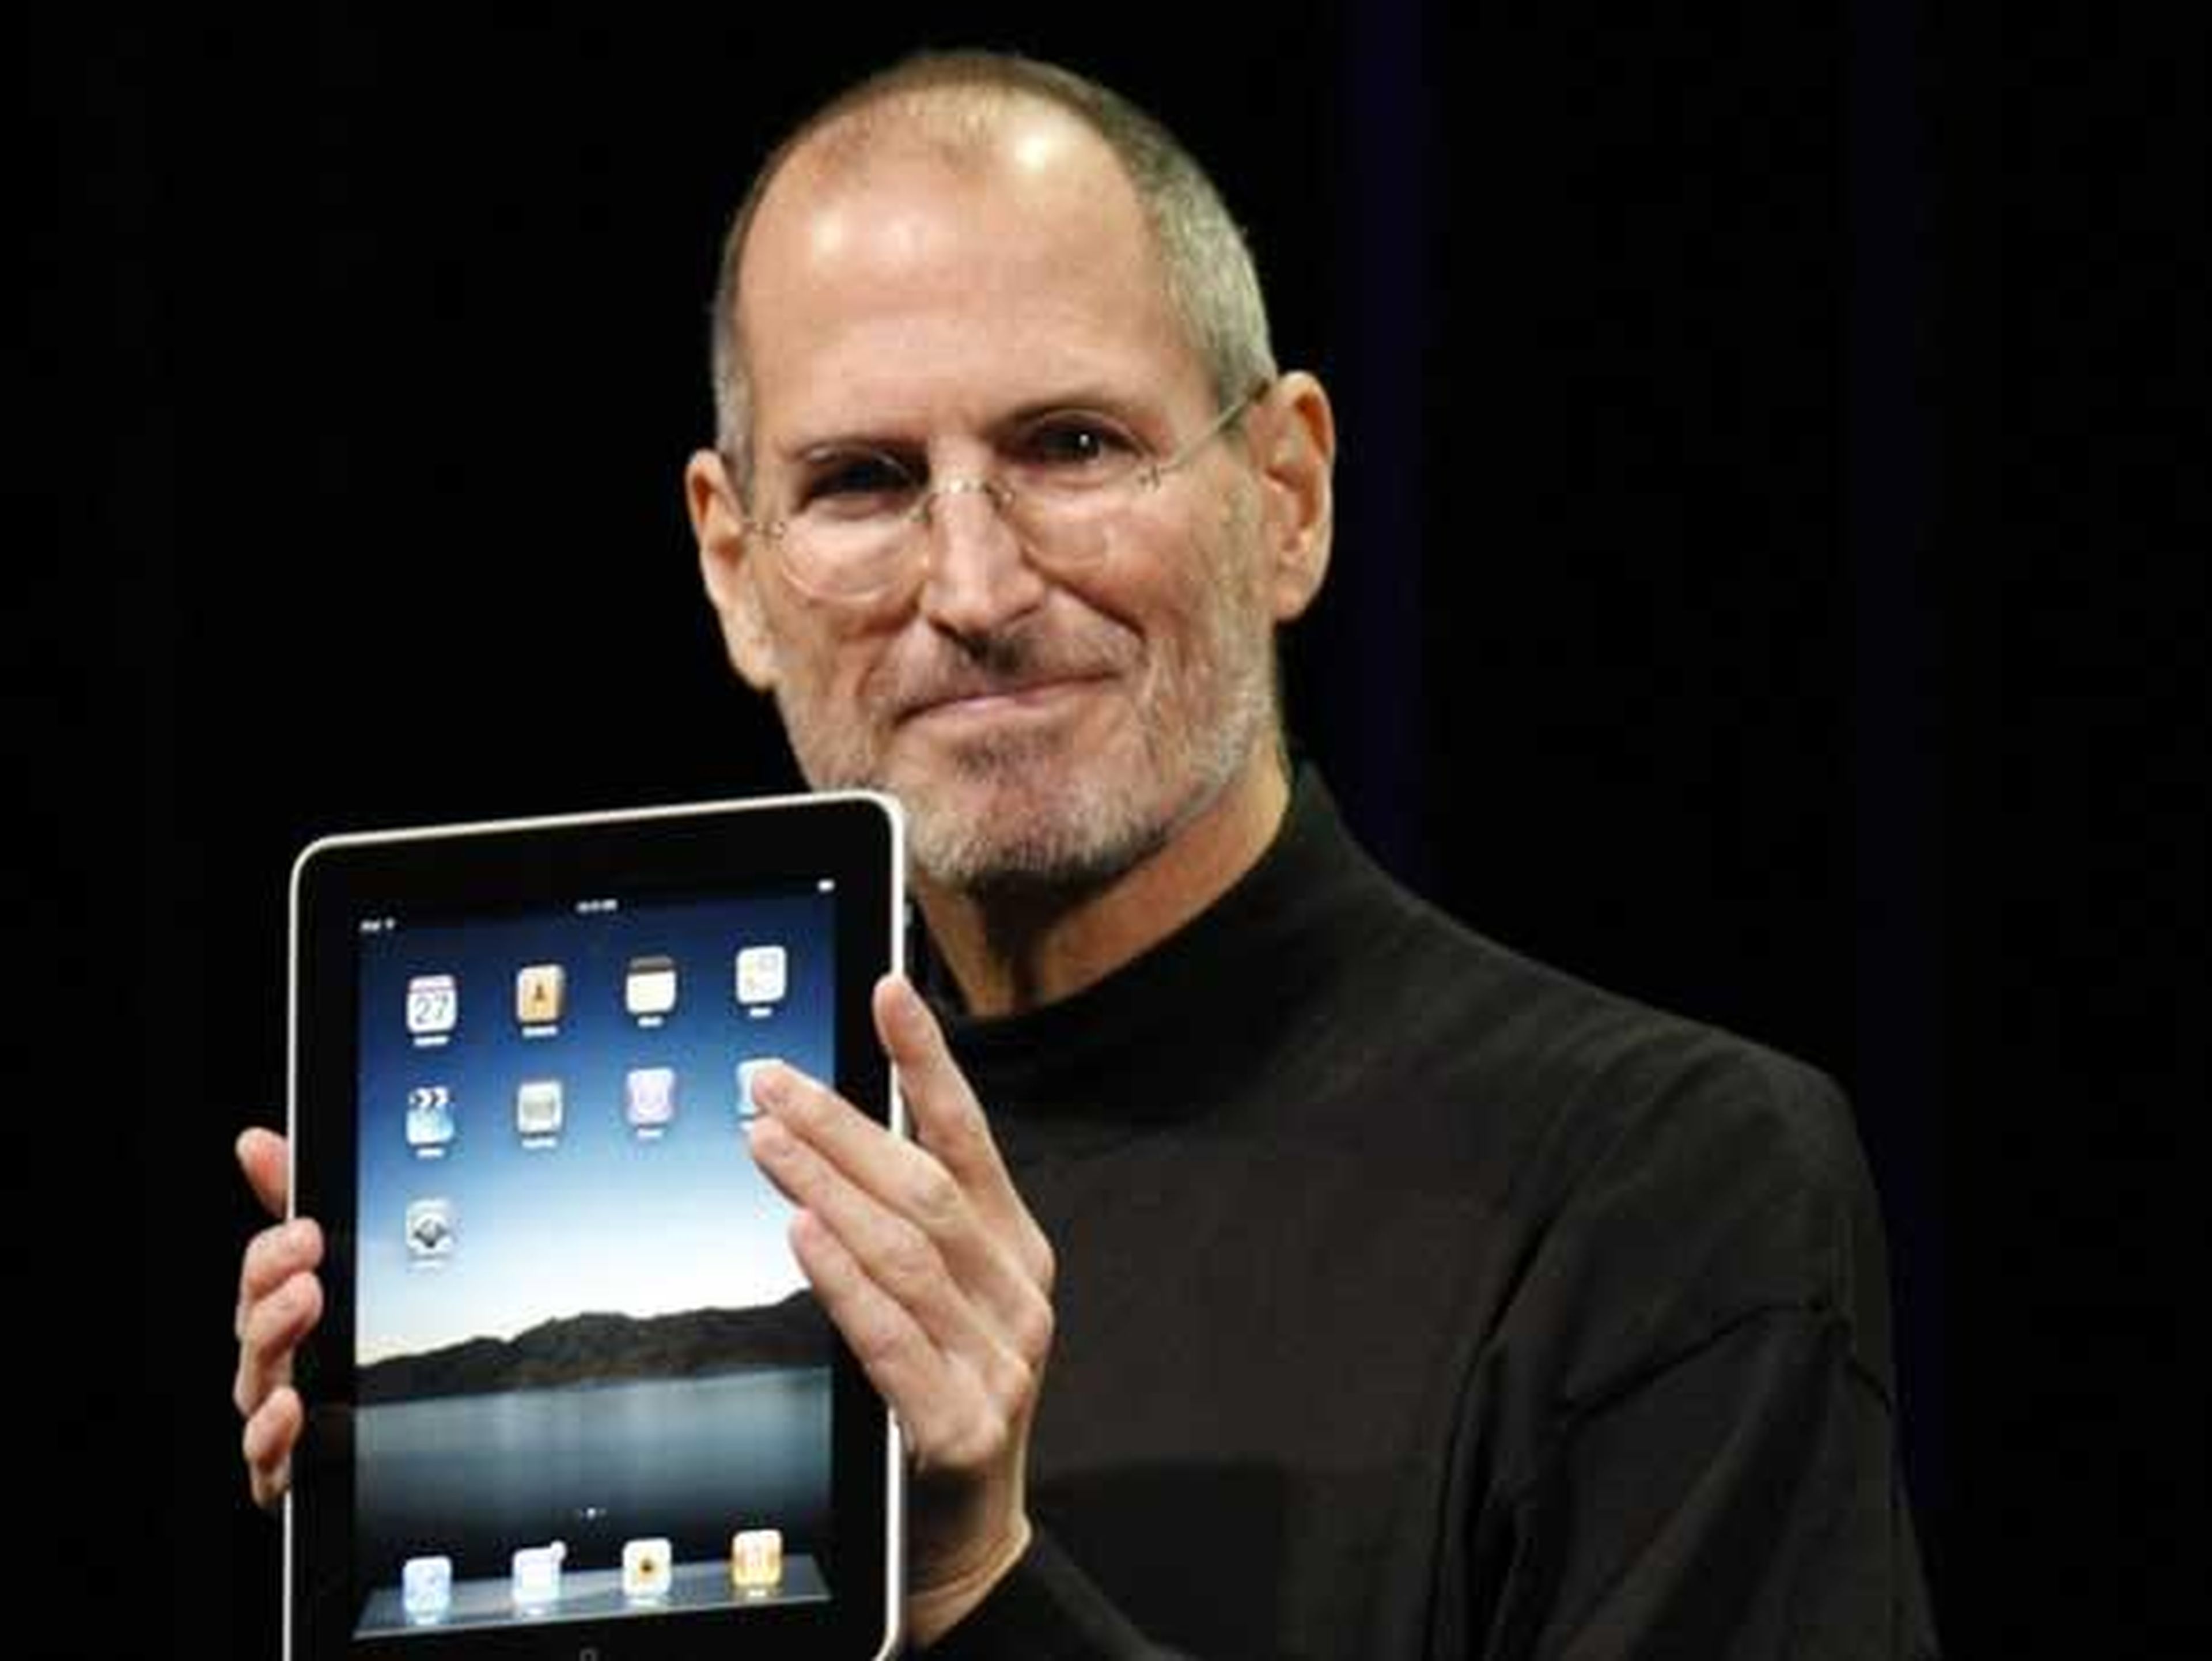 Ive helped create an entirely new category of mobile devices with the iPad, unveiled in 2010. The iPad was the first in a wave of tablets that had most of the functionality of a laptop, and was slightly larger than the iPhone.